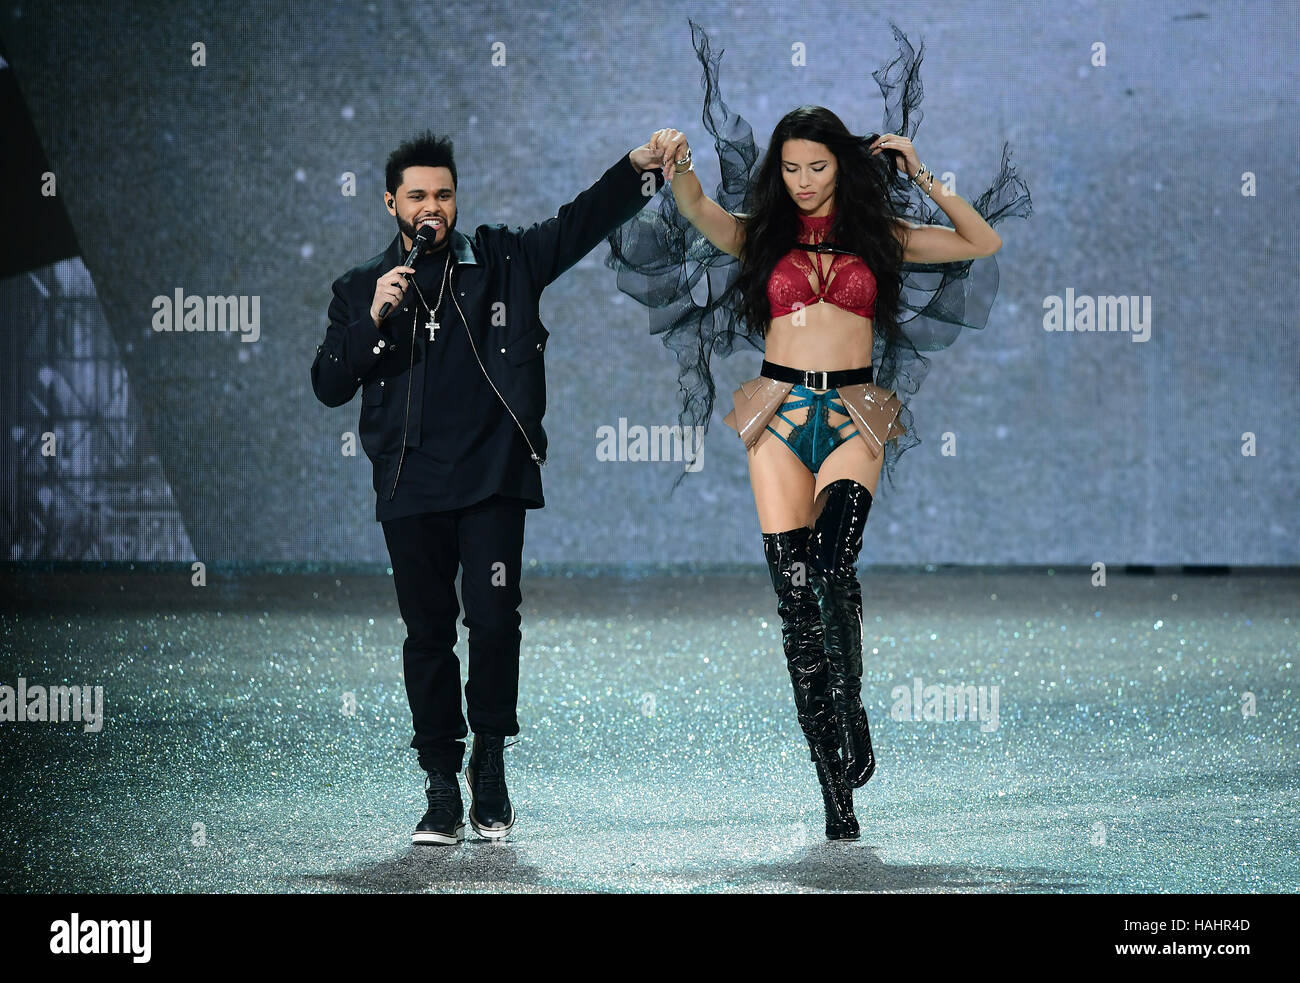 Adriana lima and the weeknd hi-res stock photography and images - Alamy